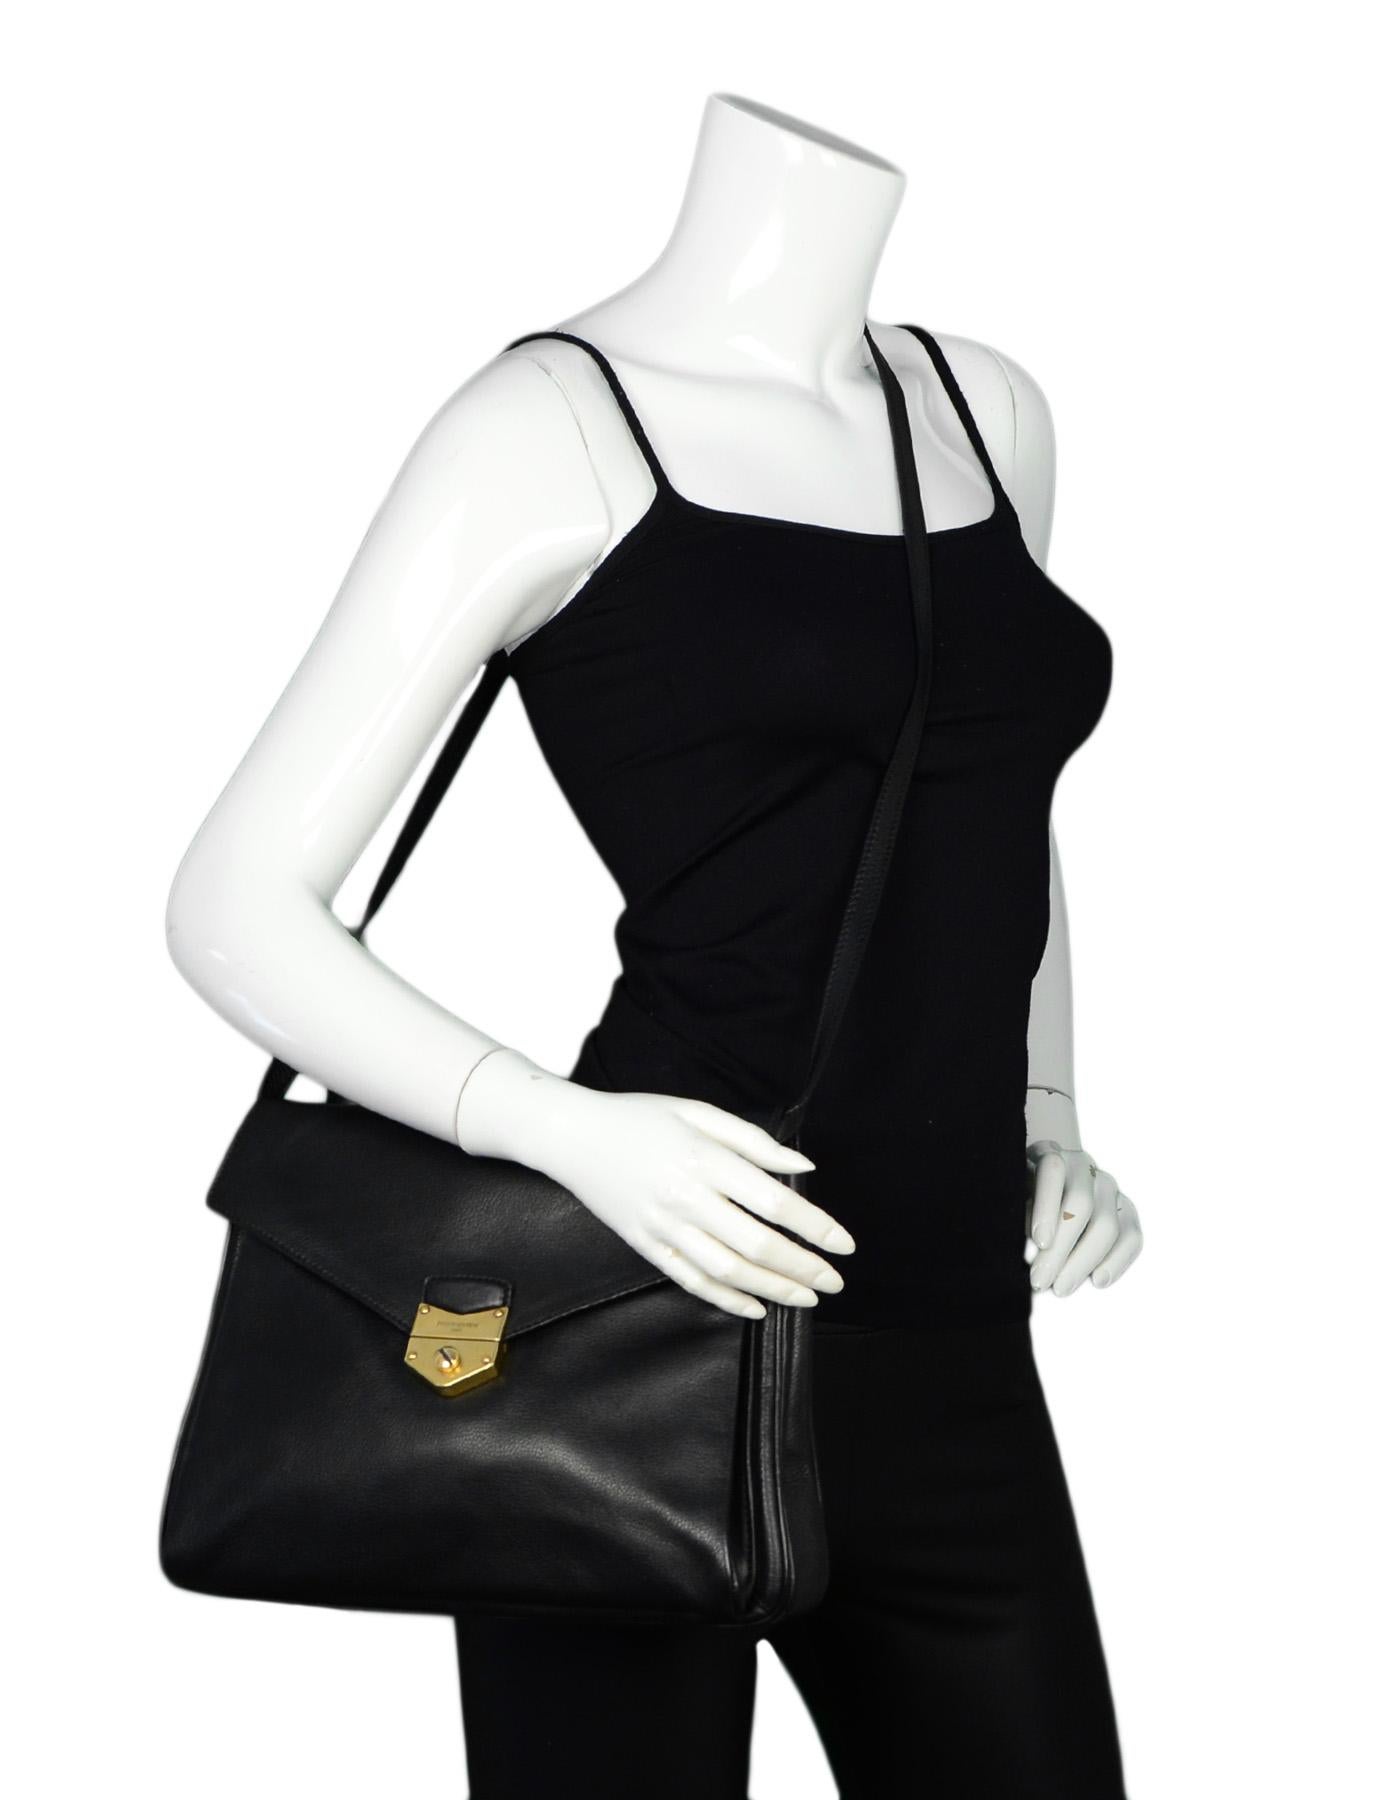 YSL Black Leather Envelope Dandy Maxi Flap Crossbody Bag

Made In: Italy
Year of Production: 2012
Color: Black, gold
Hardware: Goldtone
Materials: Leather, metal
Lining: Black textile
Closure/Opening: Flap top with pushlock closure
Exterior Pockets: